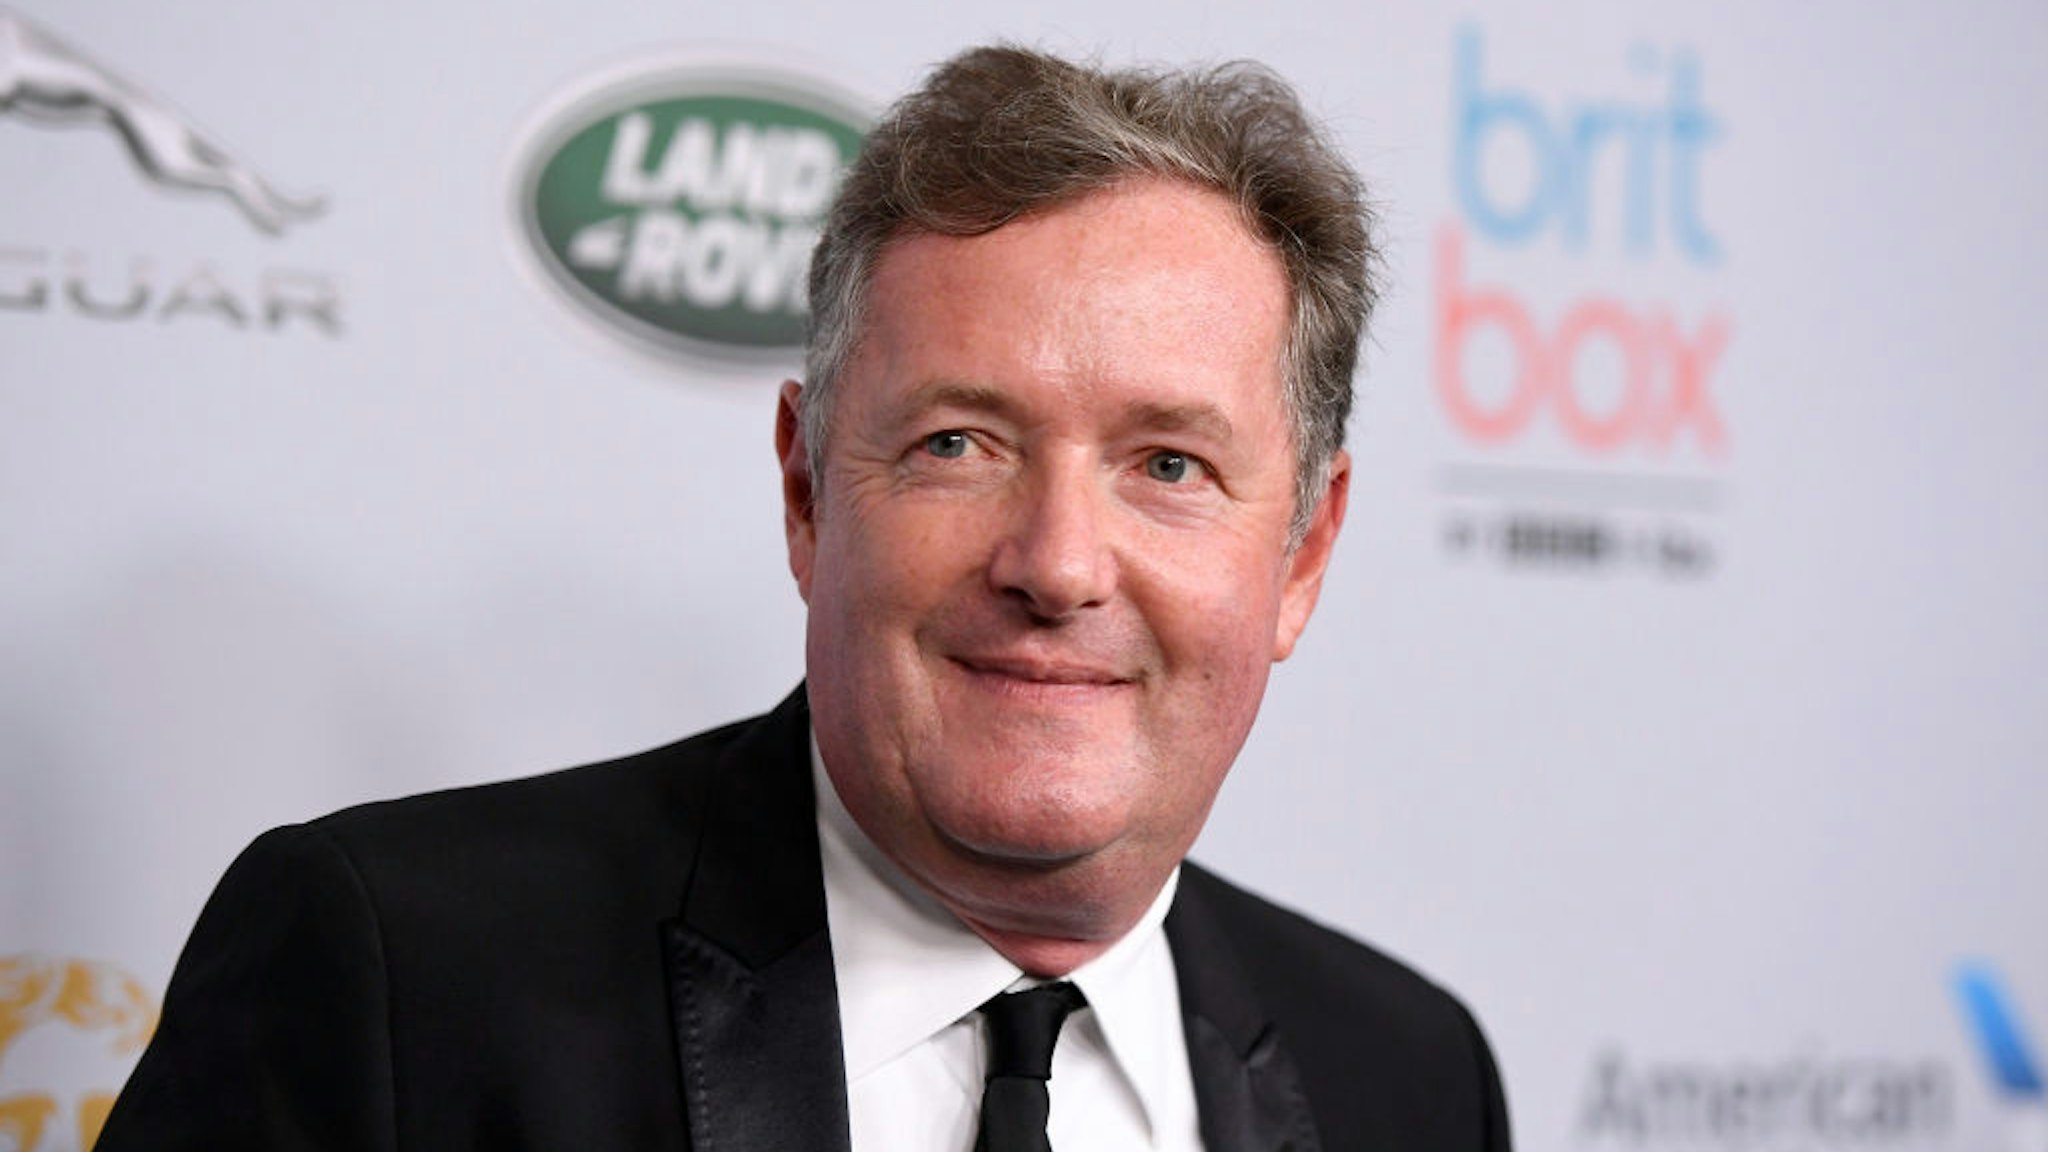 Piers Morgan attends the 2019 British Academy Britannia Awards presented by American Airlines and Jaguar Land Rover at The Beverly Hilton Hotel on October 25, 2019 in Beverly Hills, California.